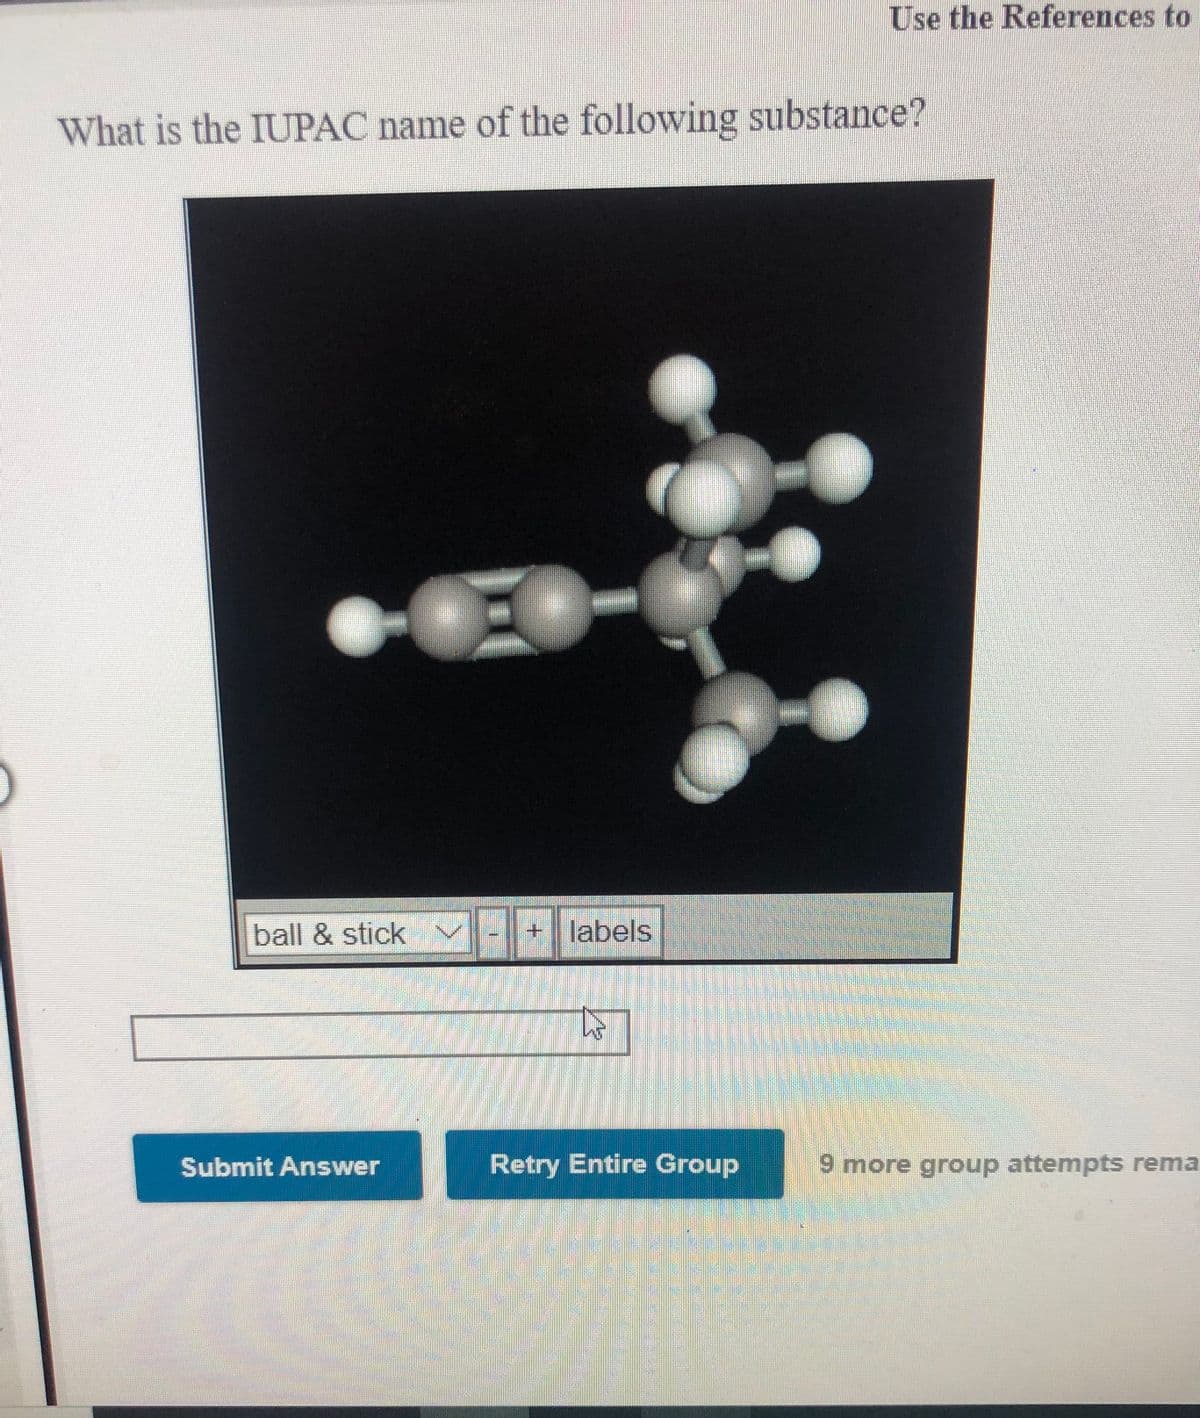 Use the References to
What is the IUPAC name of the following substance?
ball & stick v
+ labels
Submit Answer
Retry Entire Group
9 more group attempts rema
